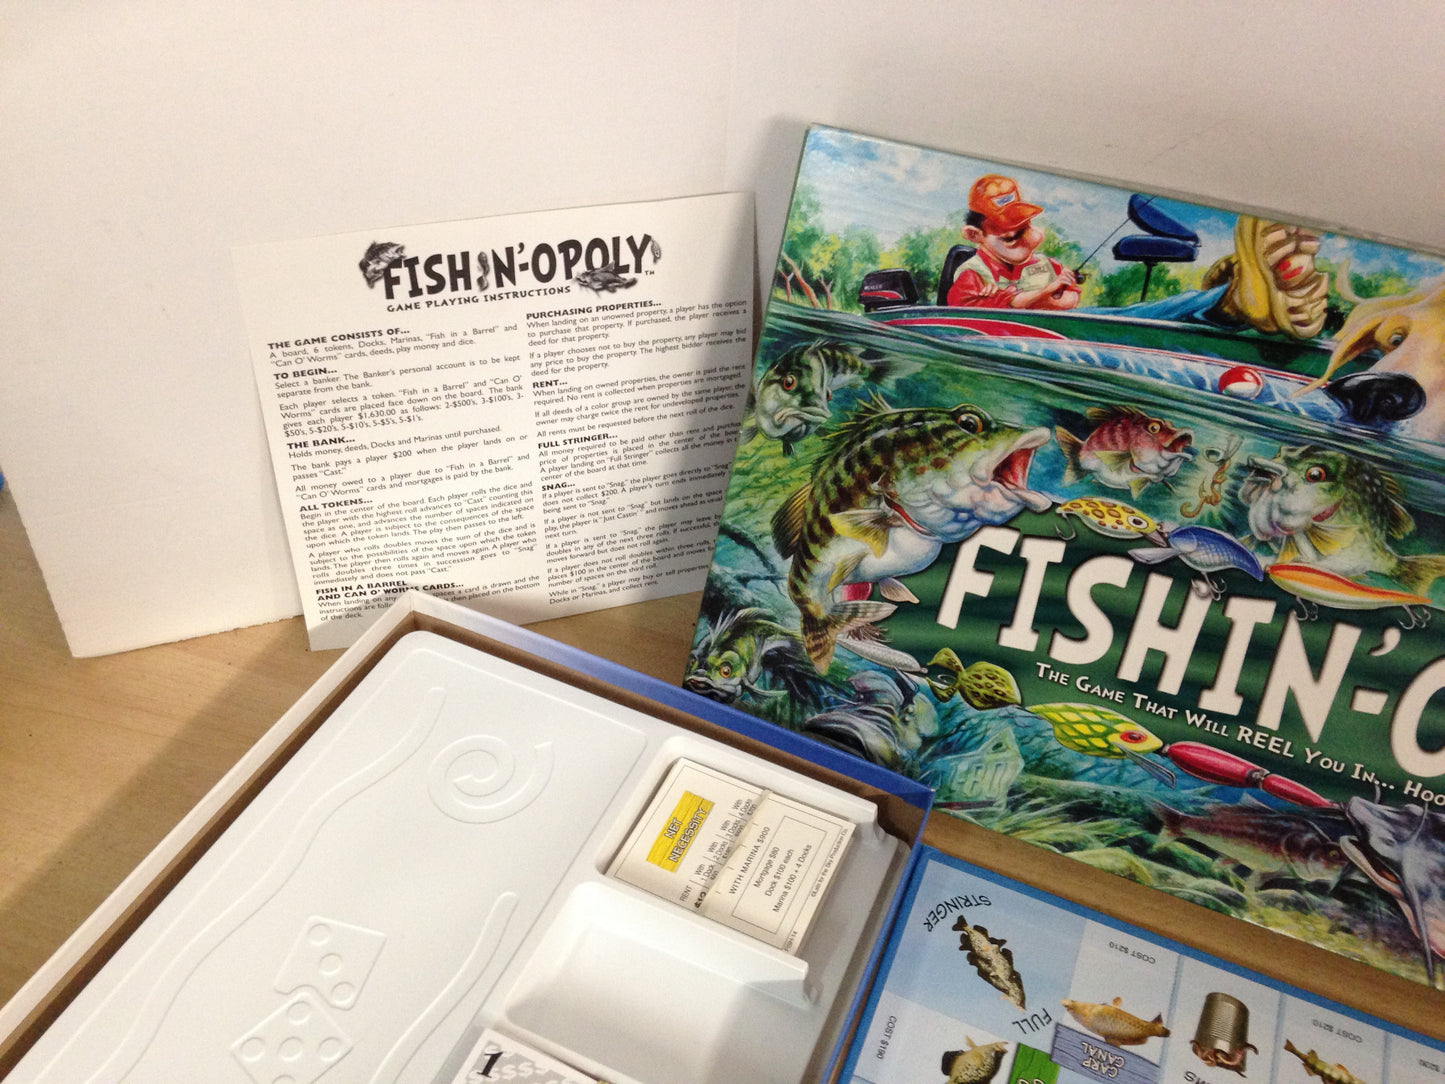 Game Fishin Opoly Monopoly As New Complete